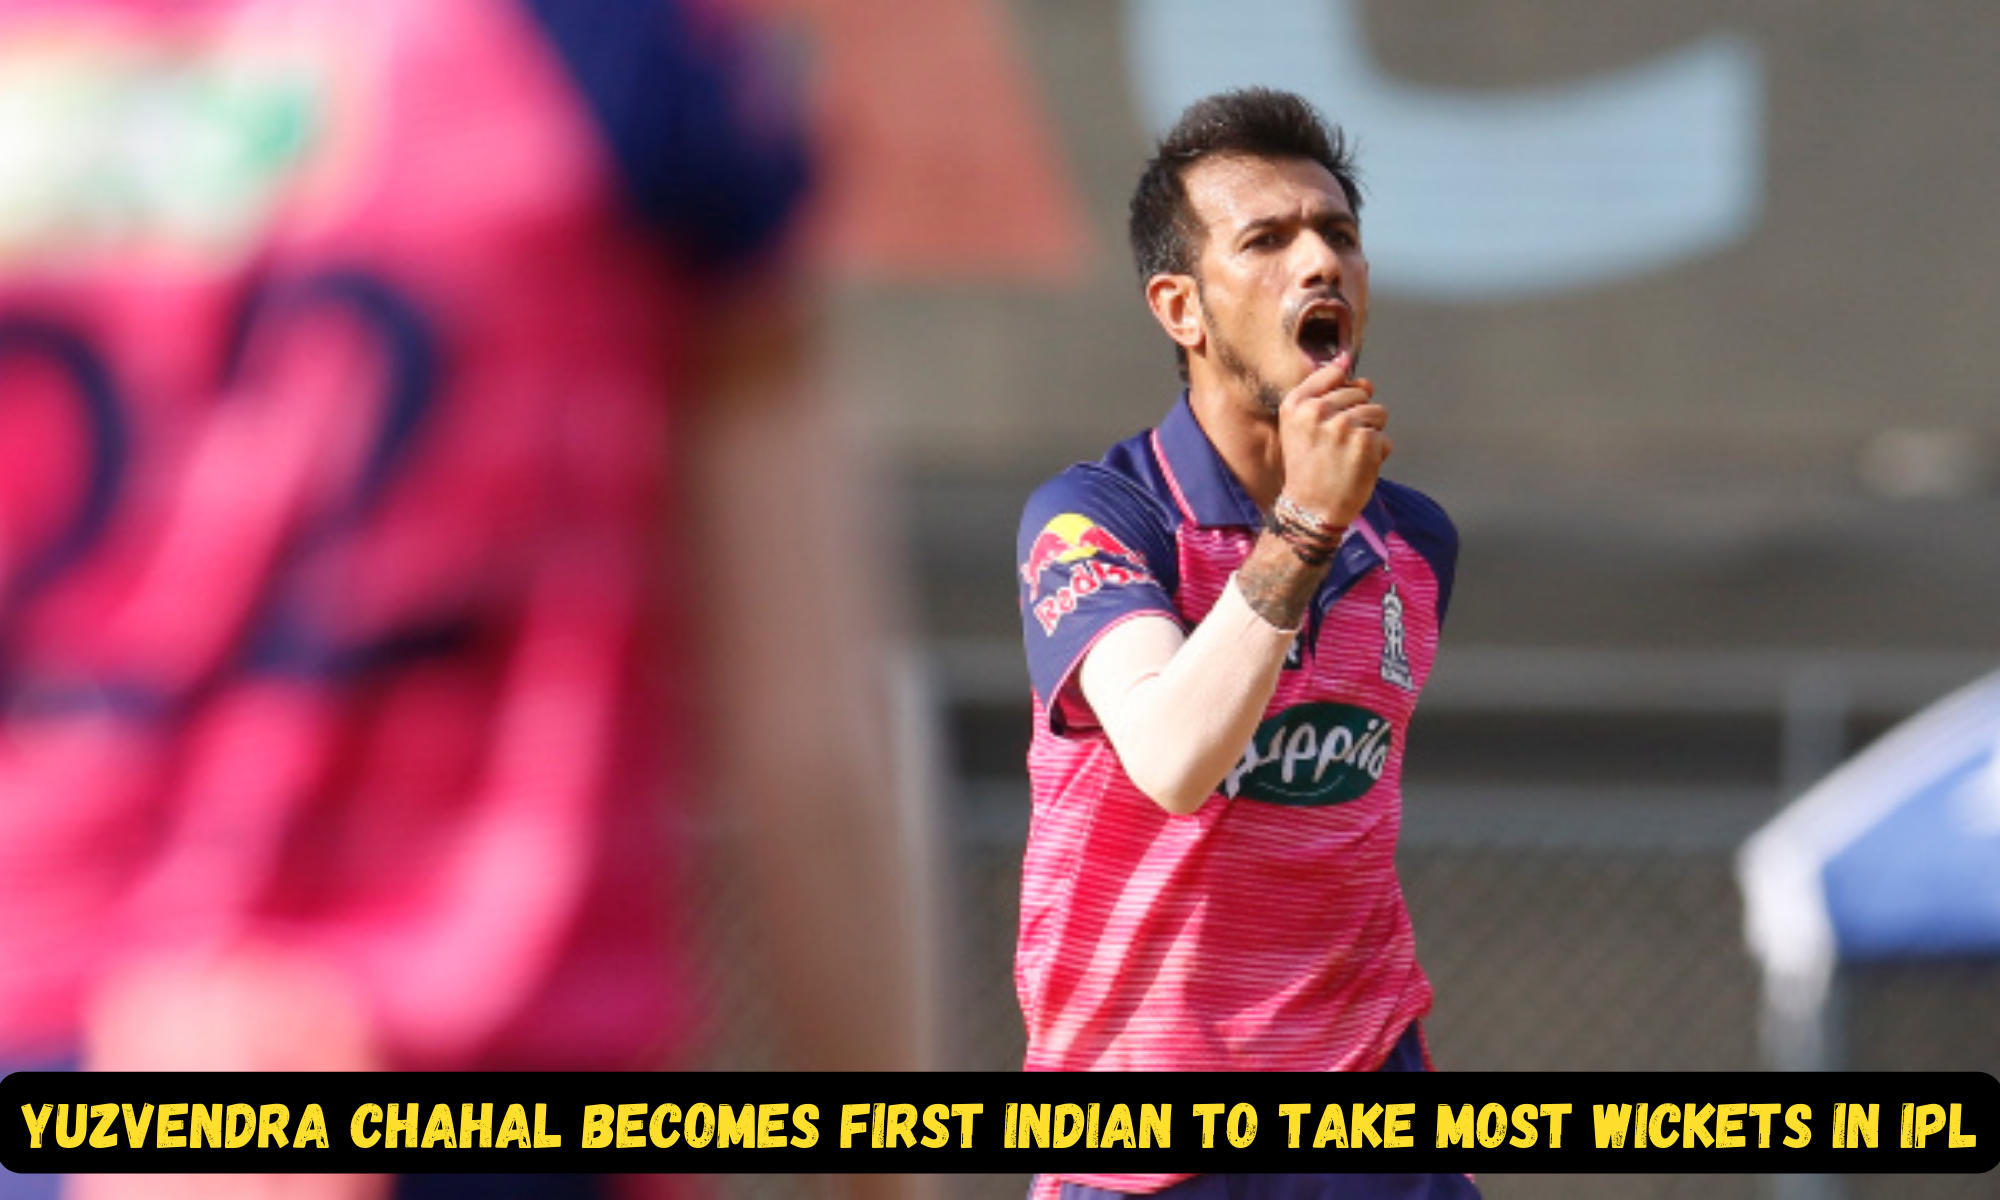 RR's Yuzvendra Chahal becomes first Indian to take most wickets in IPL